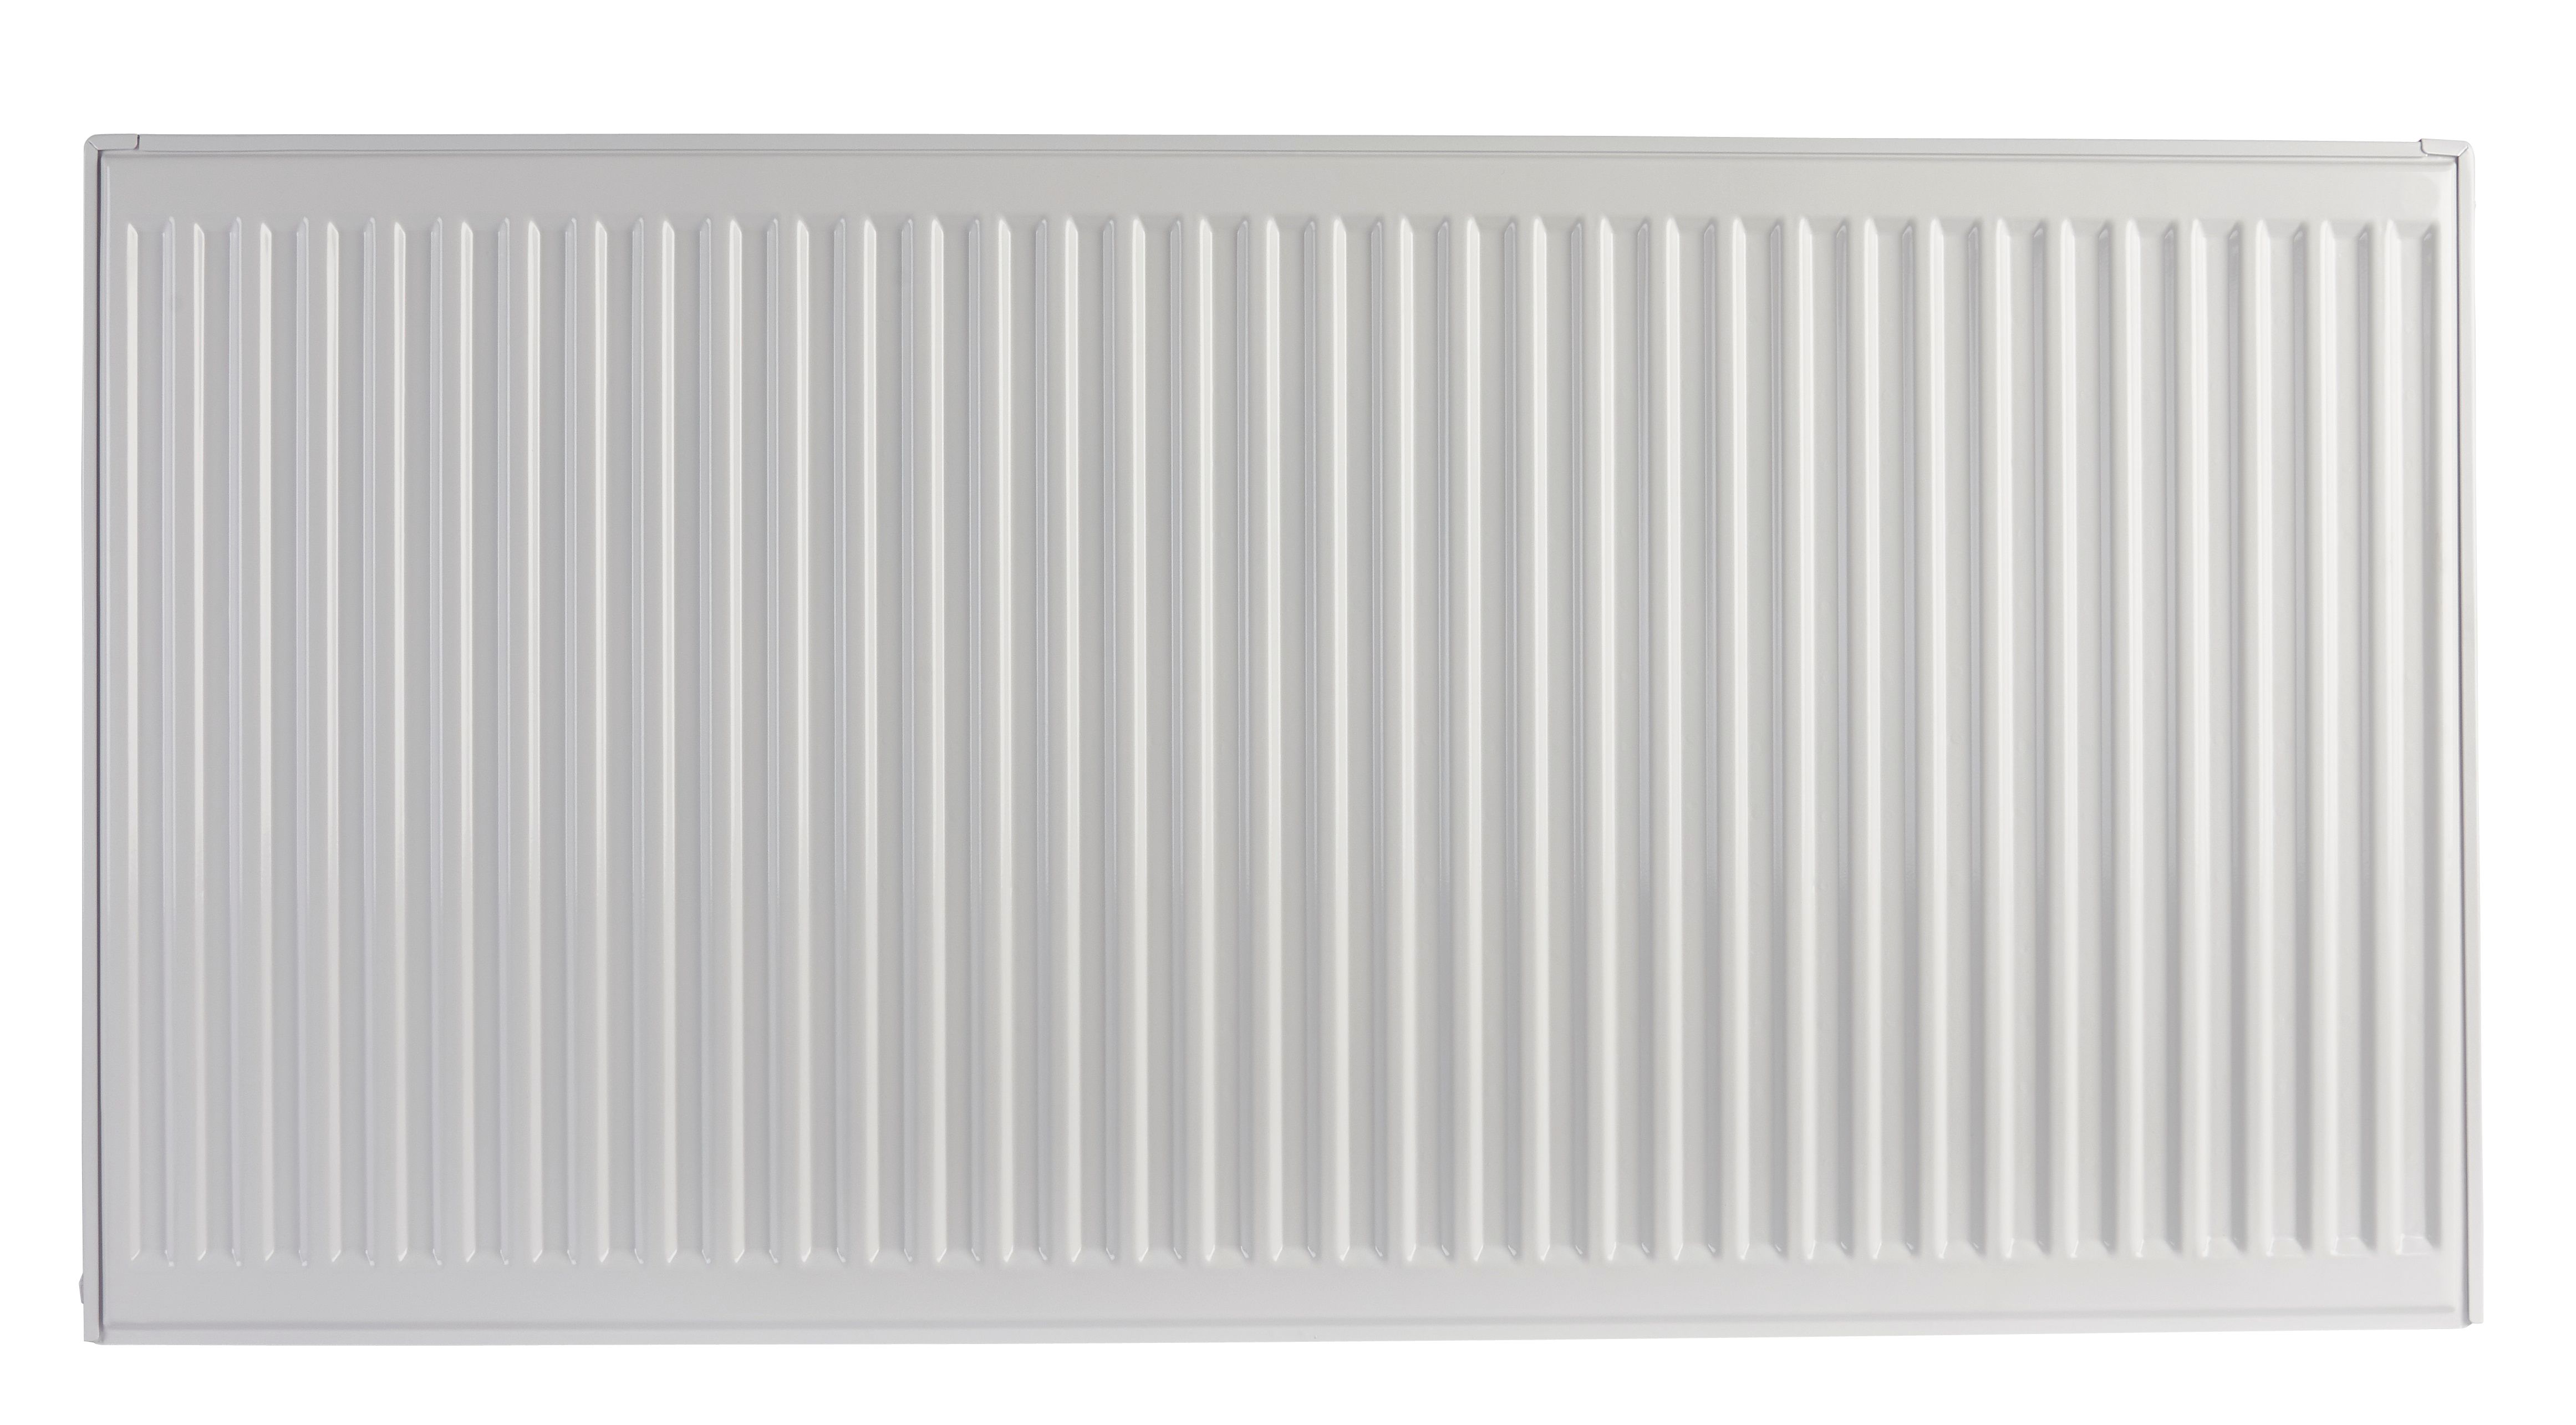 Image of Homeline by Stelrad 400 x 1200mm Type 22 Double Panel Premium Double Convector Radiator